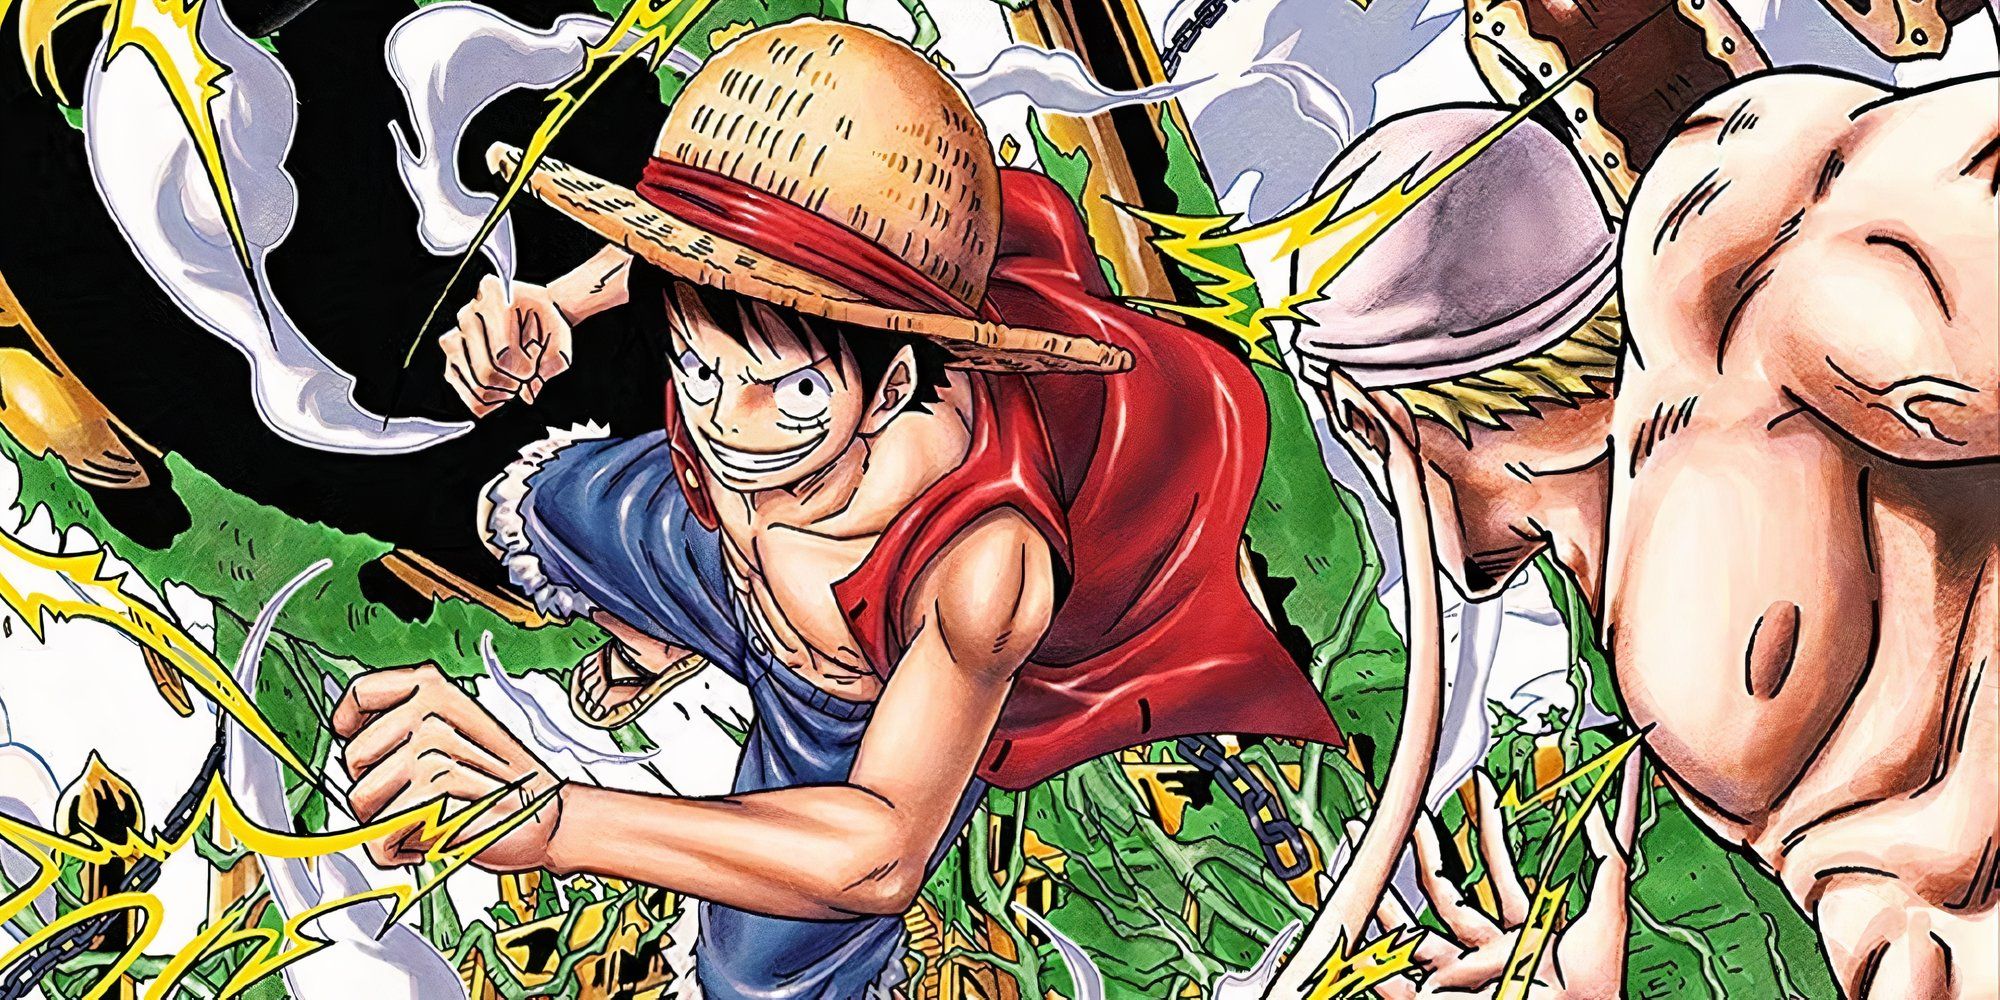 An underrated One Piece arc is the key to understanding why the series is so popular